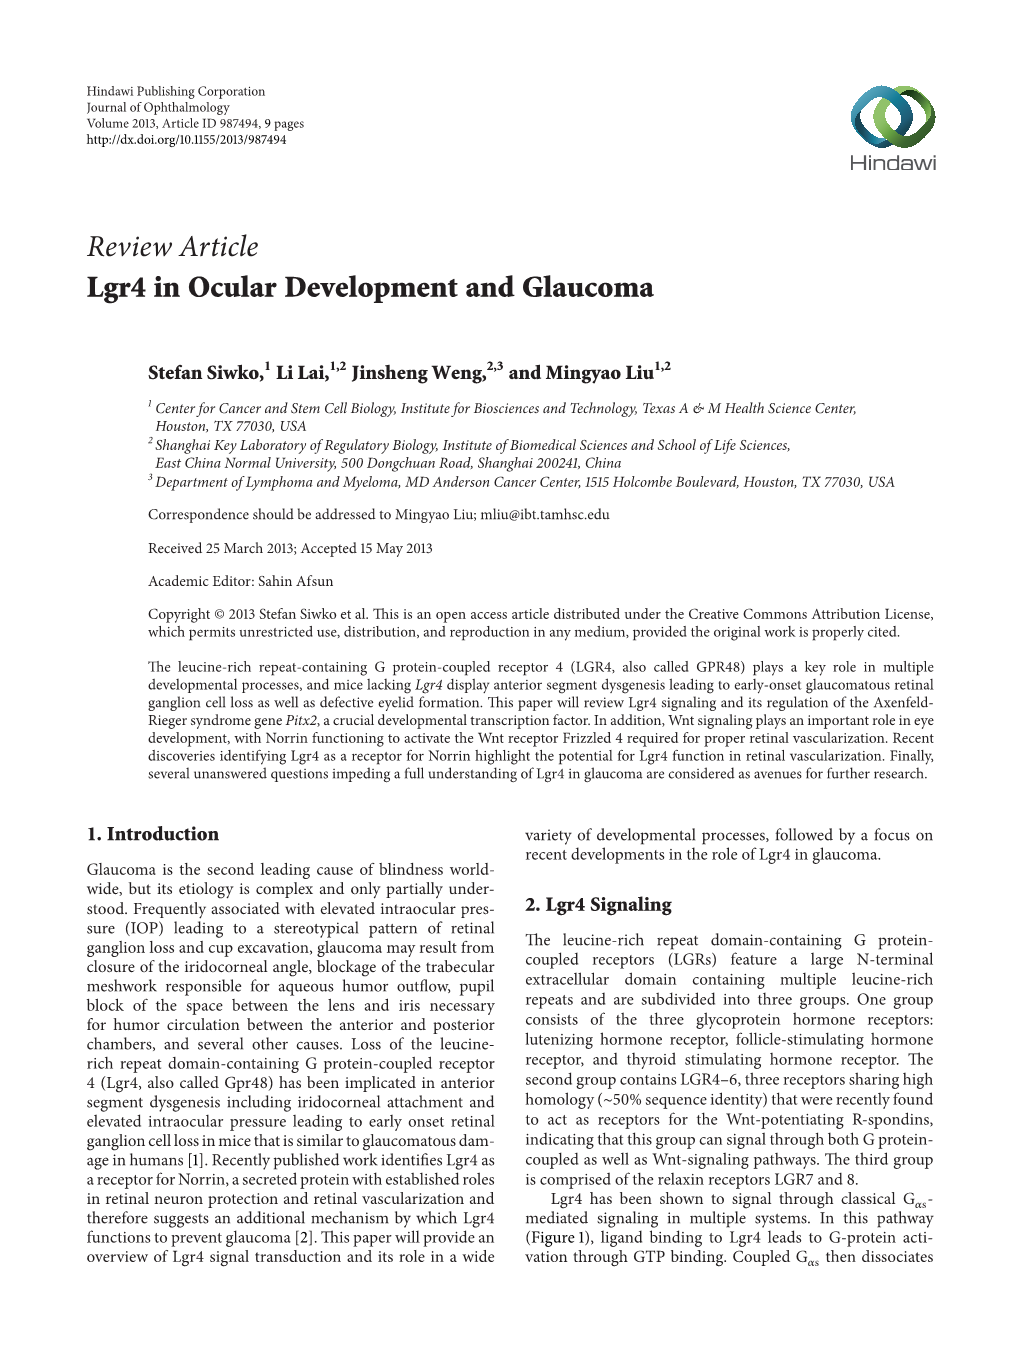 Review Article Lgr4 in Ocular Development and Glaucoma